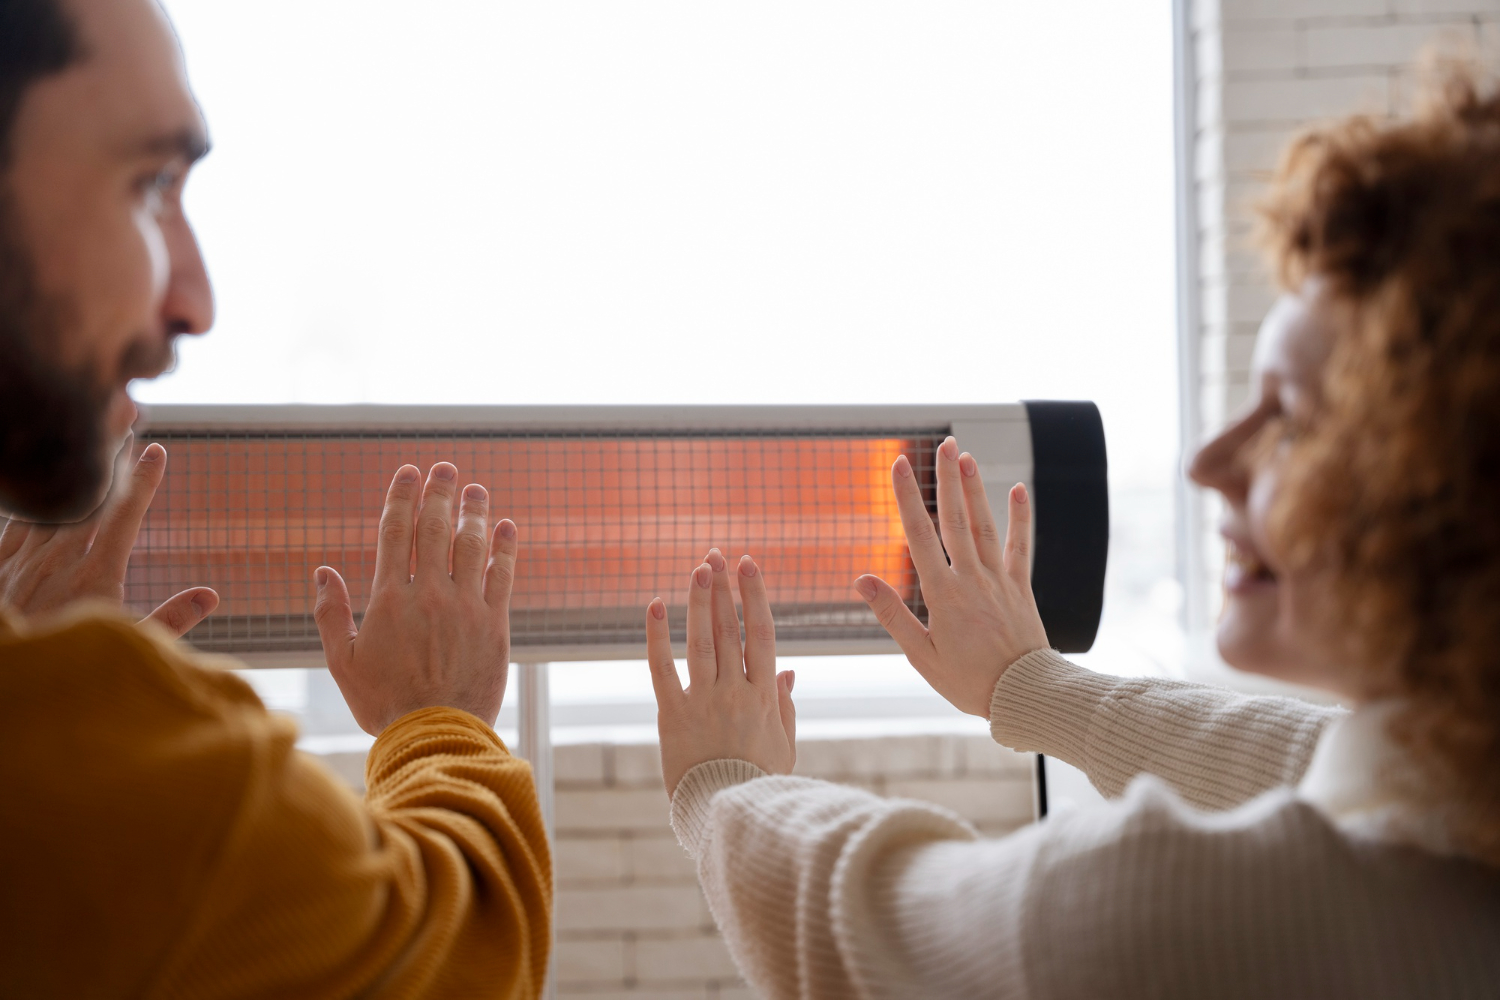 10 Best Energy Efficient Heaters in Australia I Stay at Home Mum